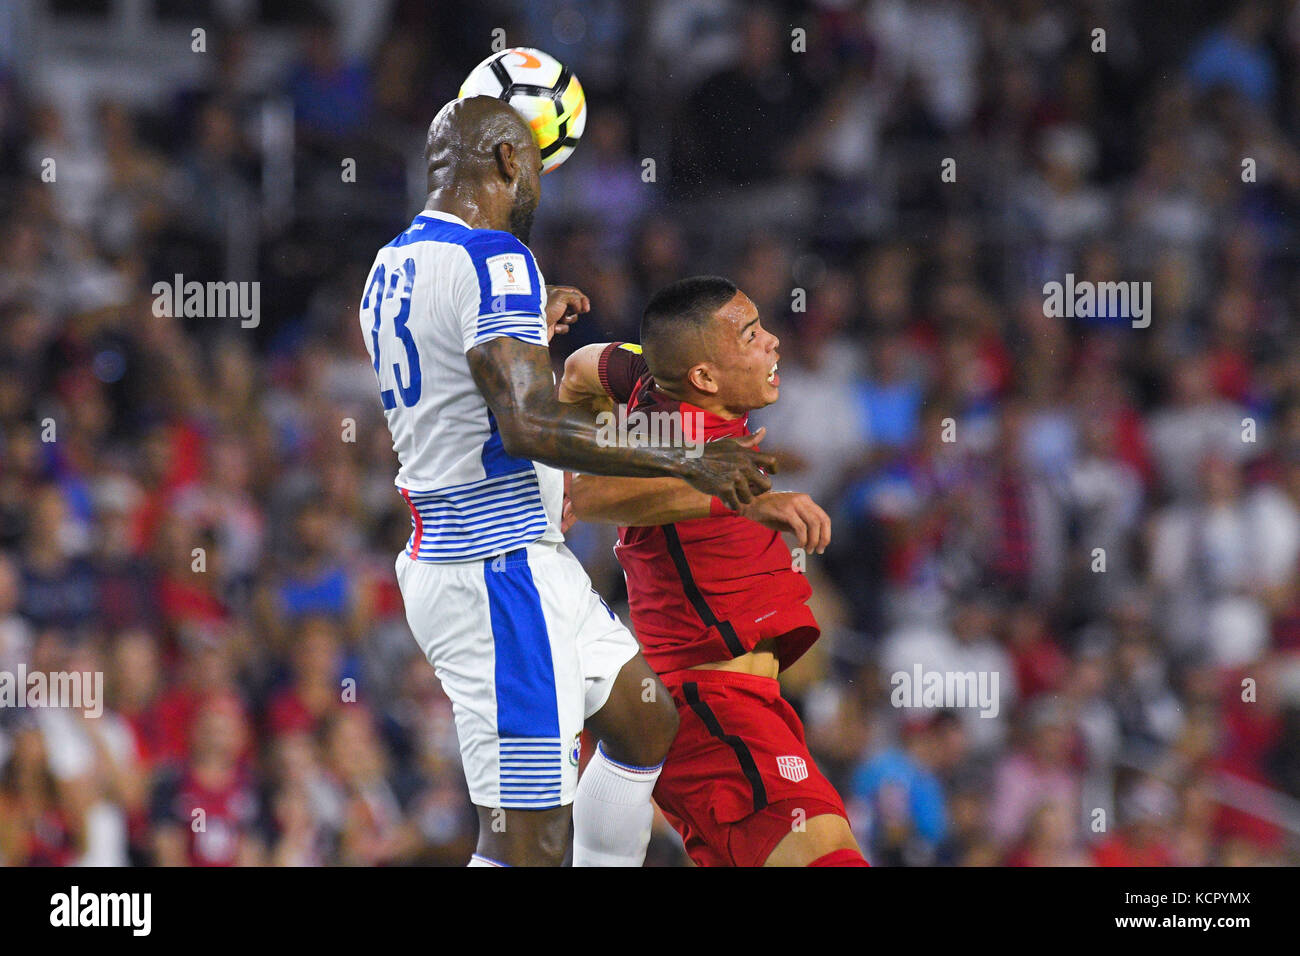 Orlando, Florida, USA. 6th Oct, 2017. Panama defender Felipe Baloy (23) and United States forward Bobby Wood (9) go airborne for a ball during a World Cup qualifying game at Orlando City Stadium on Oct. 6, 2017 in Orlando, Florida. The US won 4-0.Zuma Press/Scott A. Miller Credit: Scott A. Miller/ZUMA Wire/Alamy Live News Stock Photo